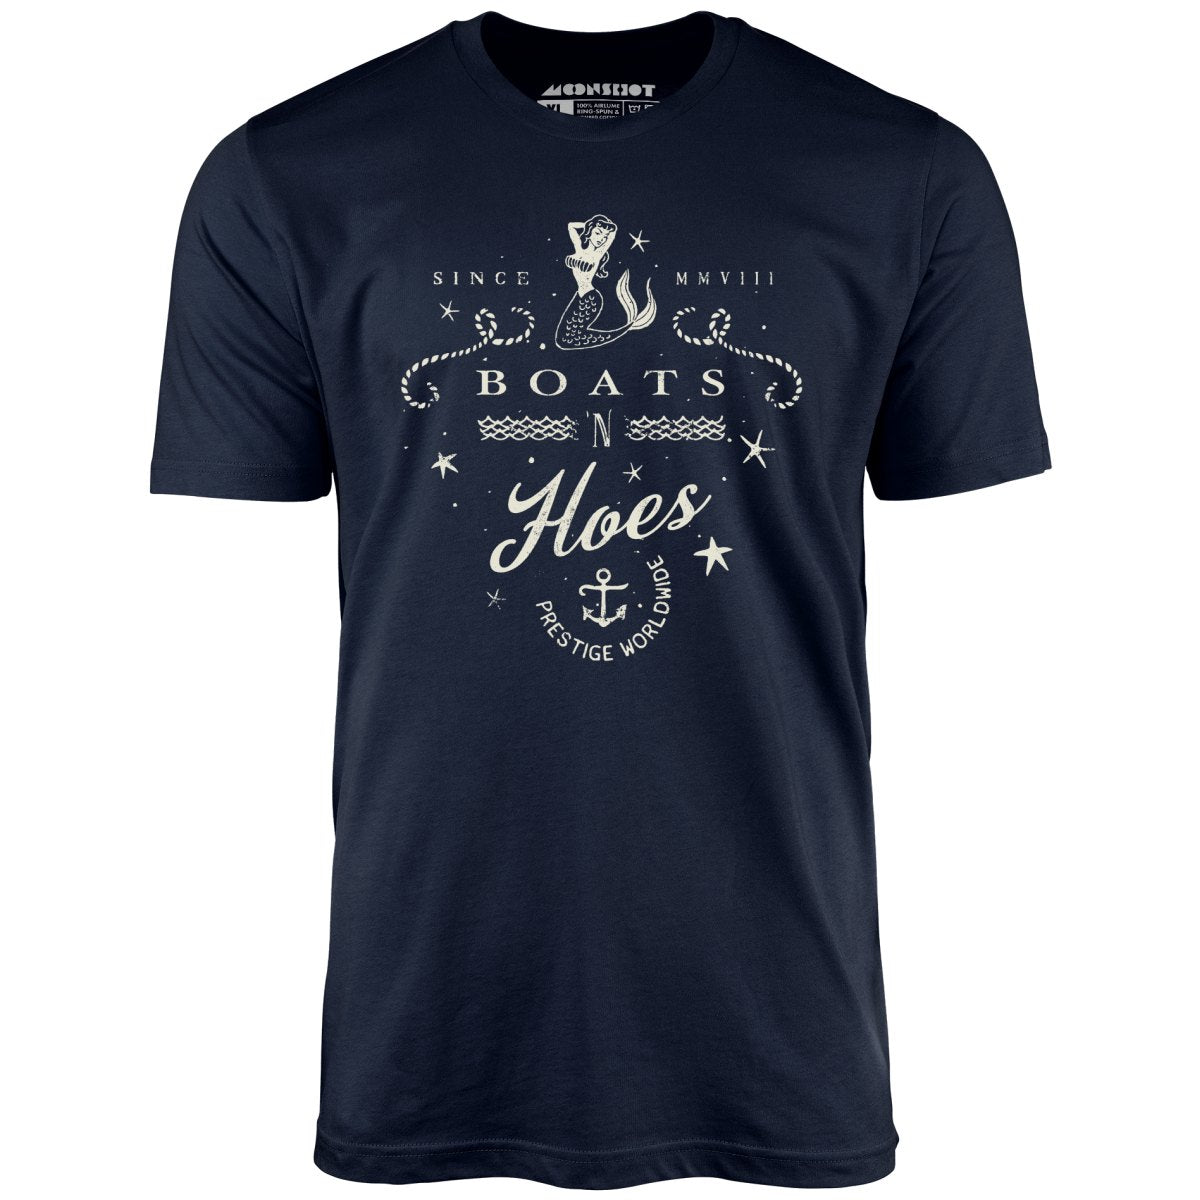 Boats n Hoes - Unisex T-Shirt